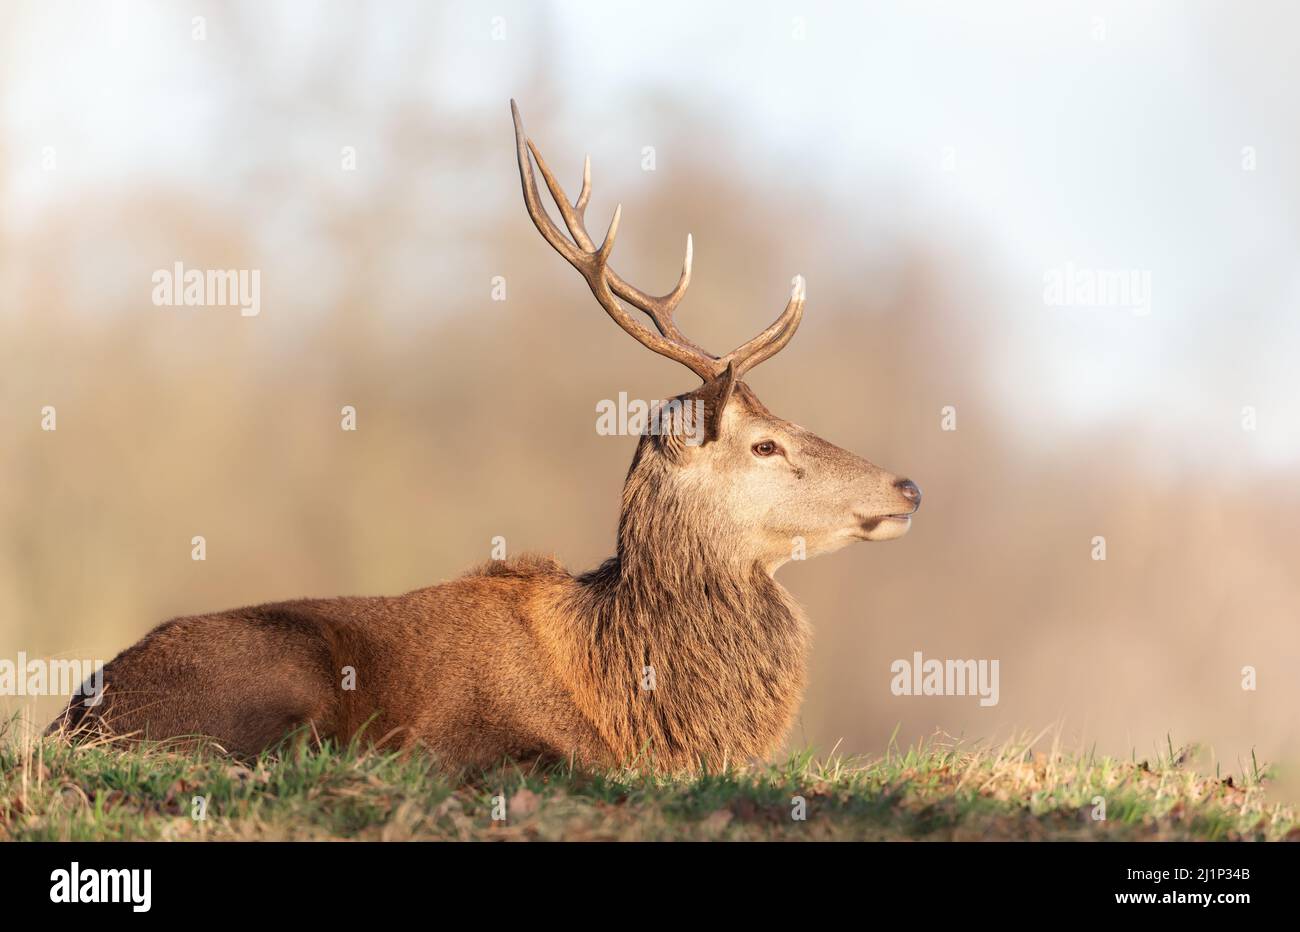 Portrait of a red deer stag lying on grass, United Kingdom. Stock Photo